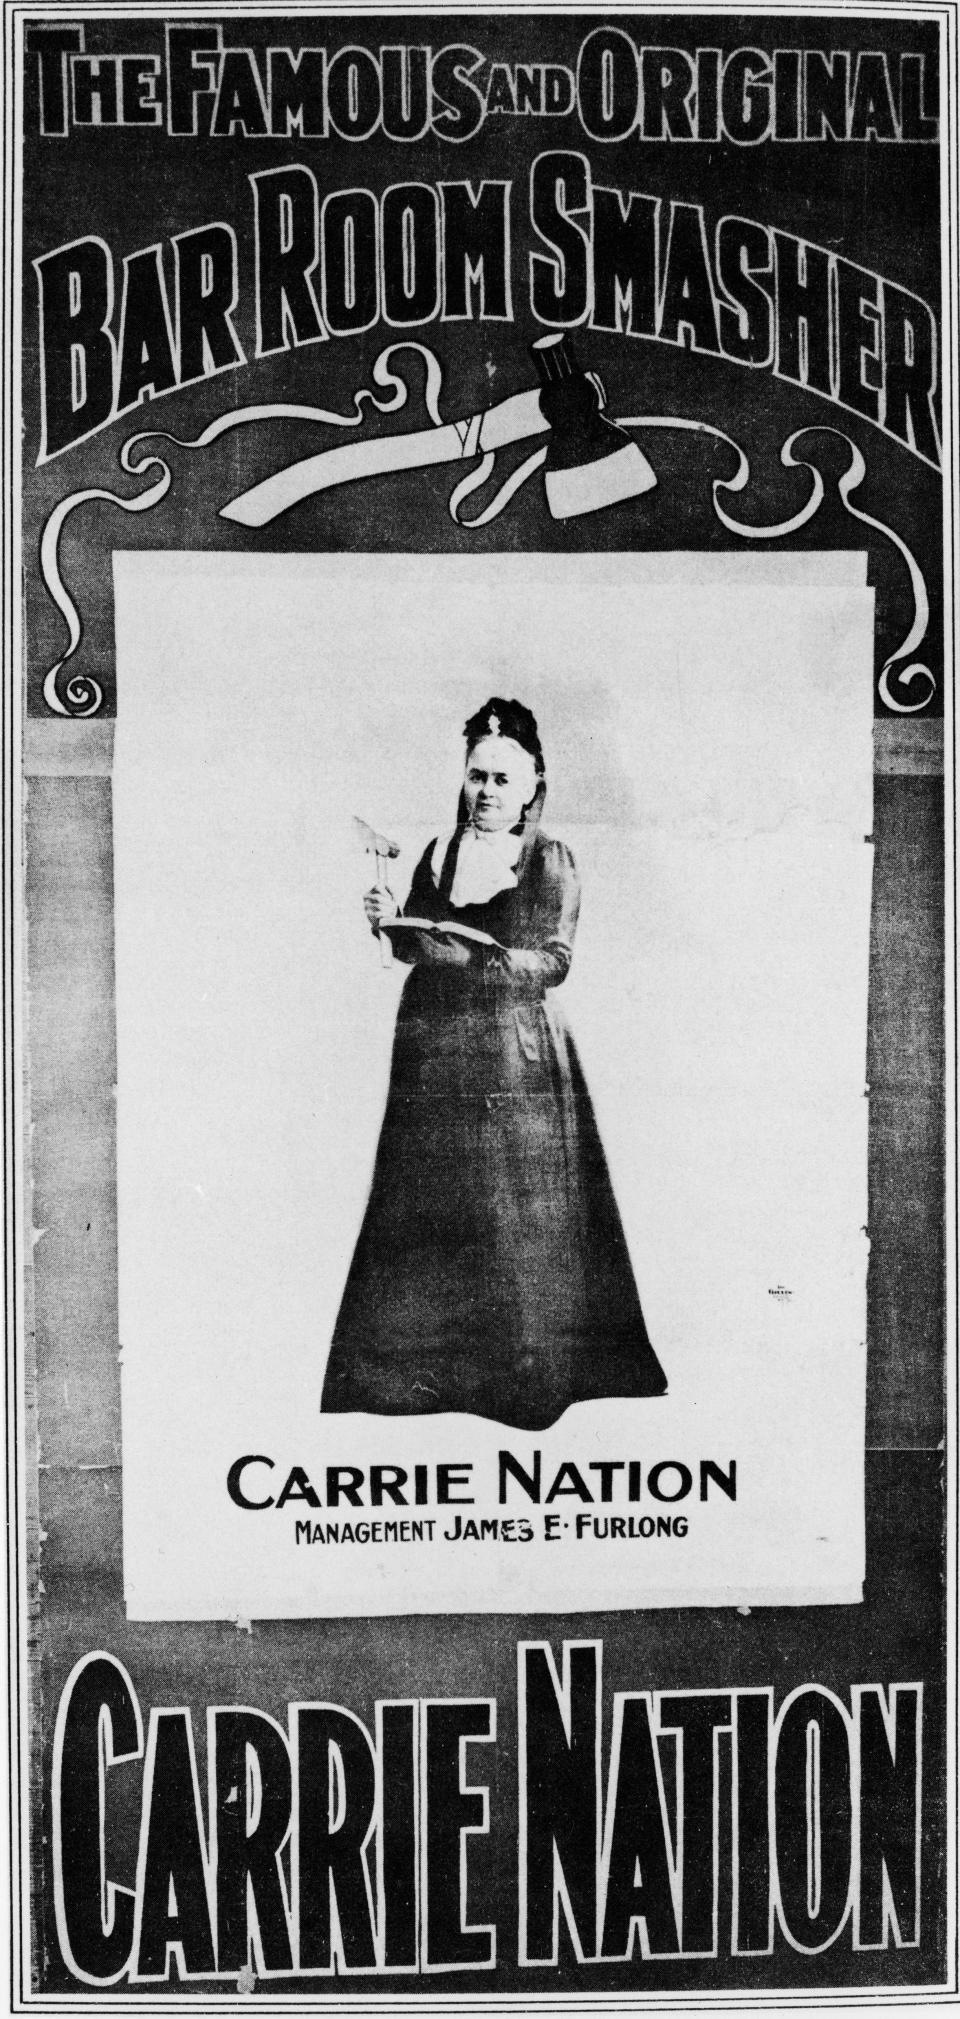 image of old sign showing Nation with an axe and Bible, reading "The infamous and Original Bar Room Smasher Carrie Nation"